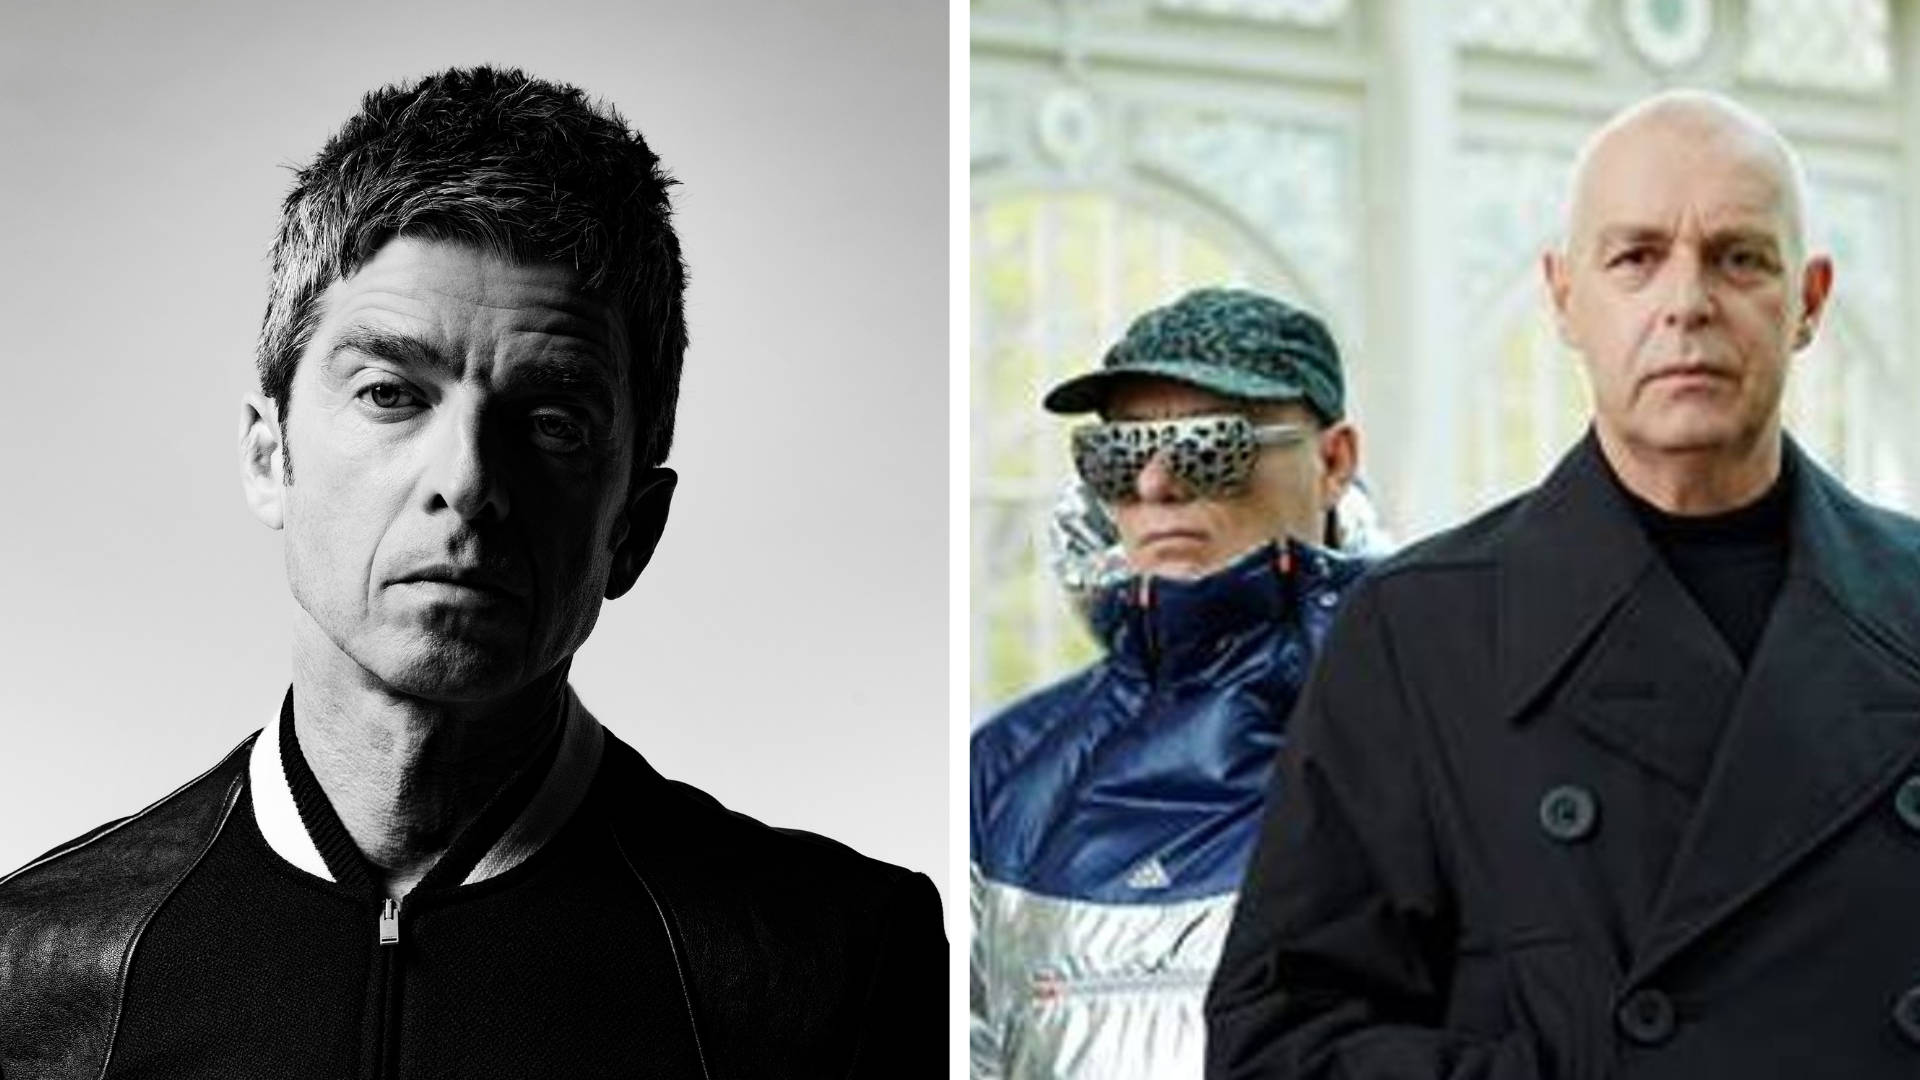 Noel Gallagher and Pet Shop Boys have collaborated on a remix on